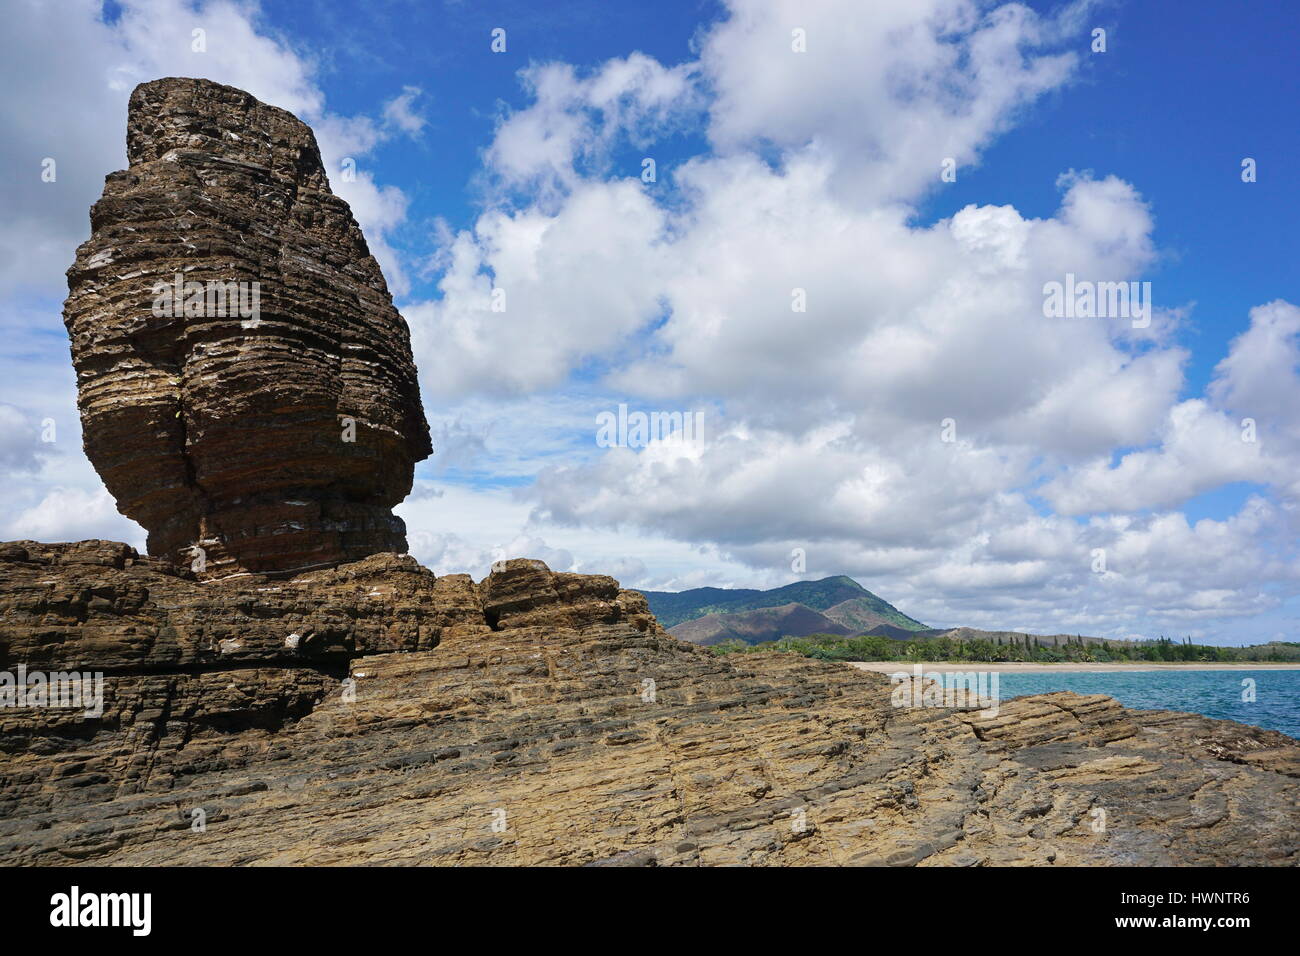 Rock formation on the seashore, the Bonhomme of Bourail, New Caledonia, Grande Terre island, south Pacific Stock Photo